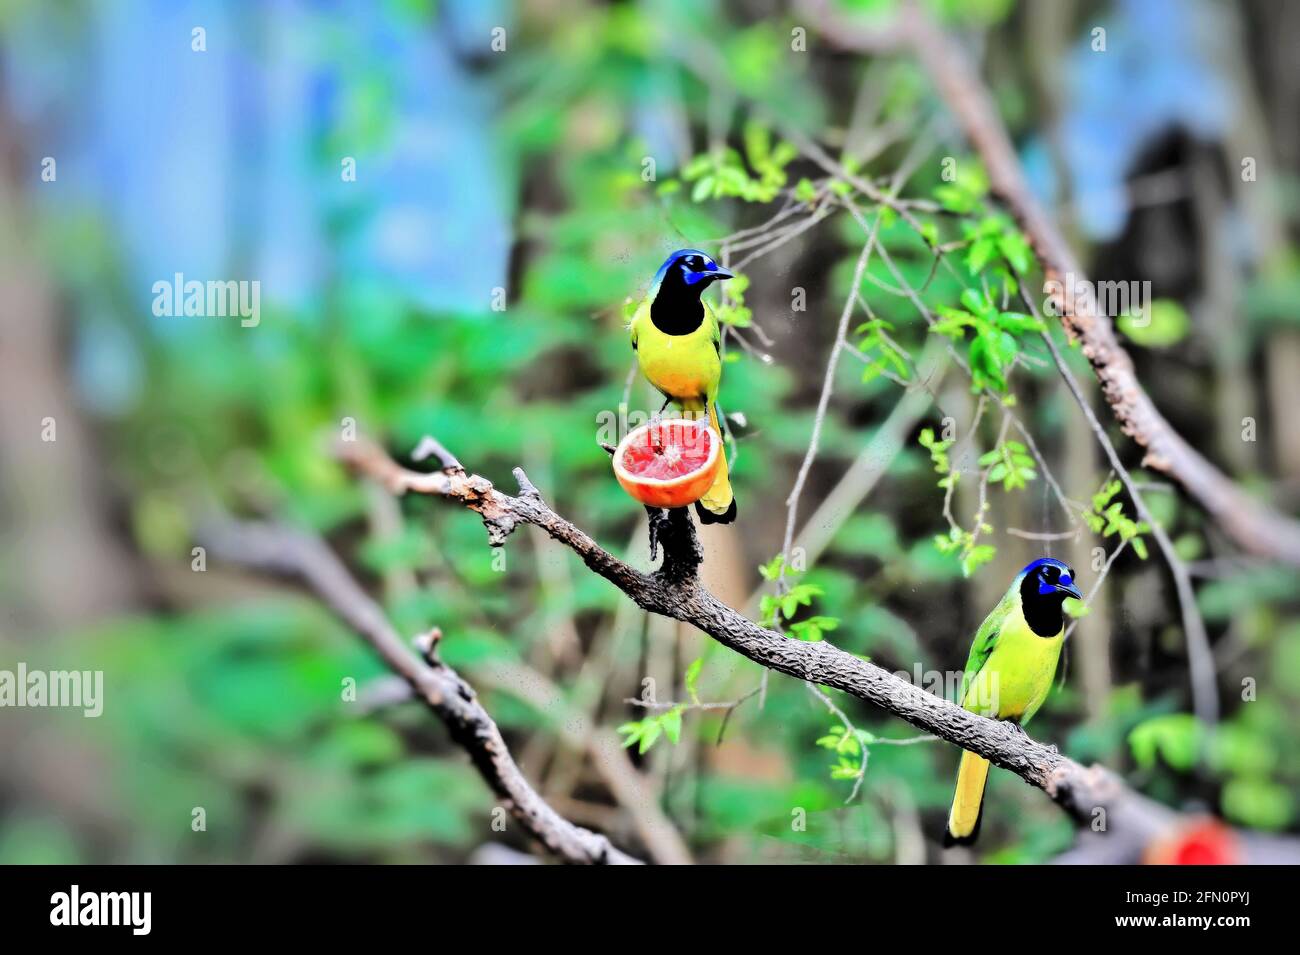 Green jays in a park near Mission Texas, where the park puts food out to attract birds. Stock Photo